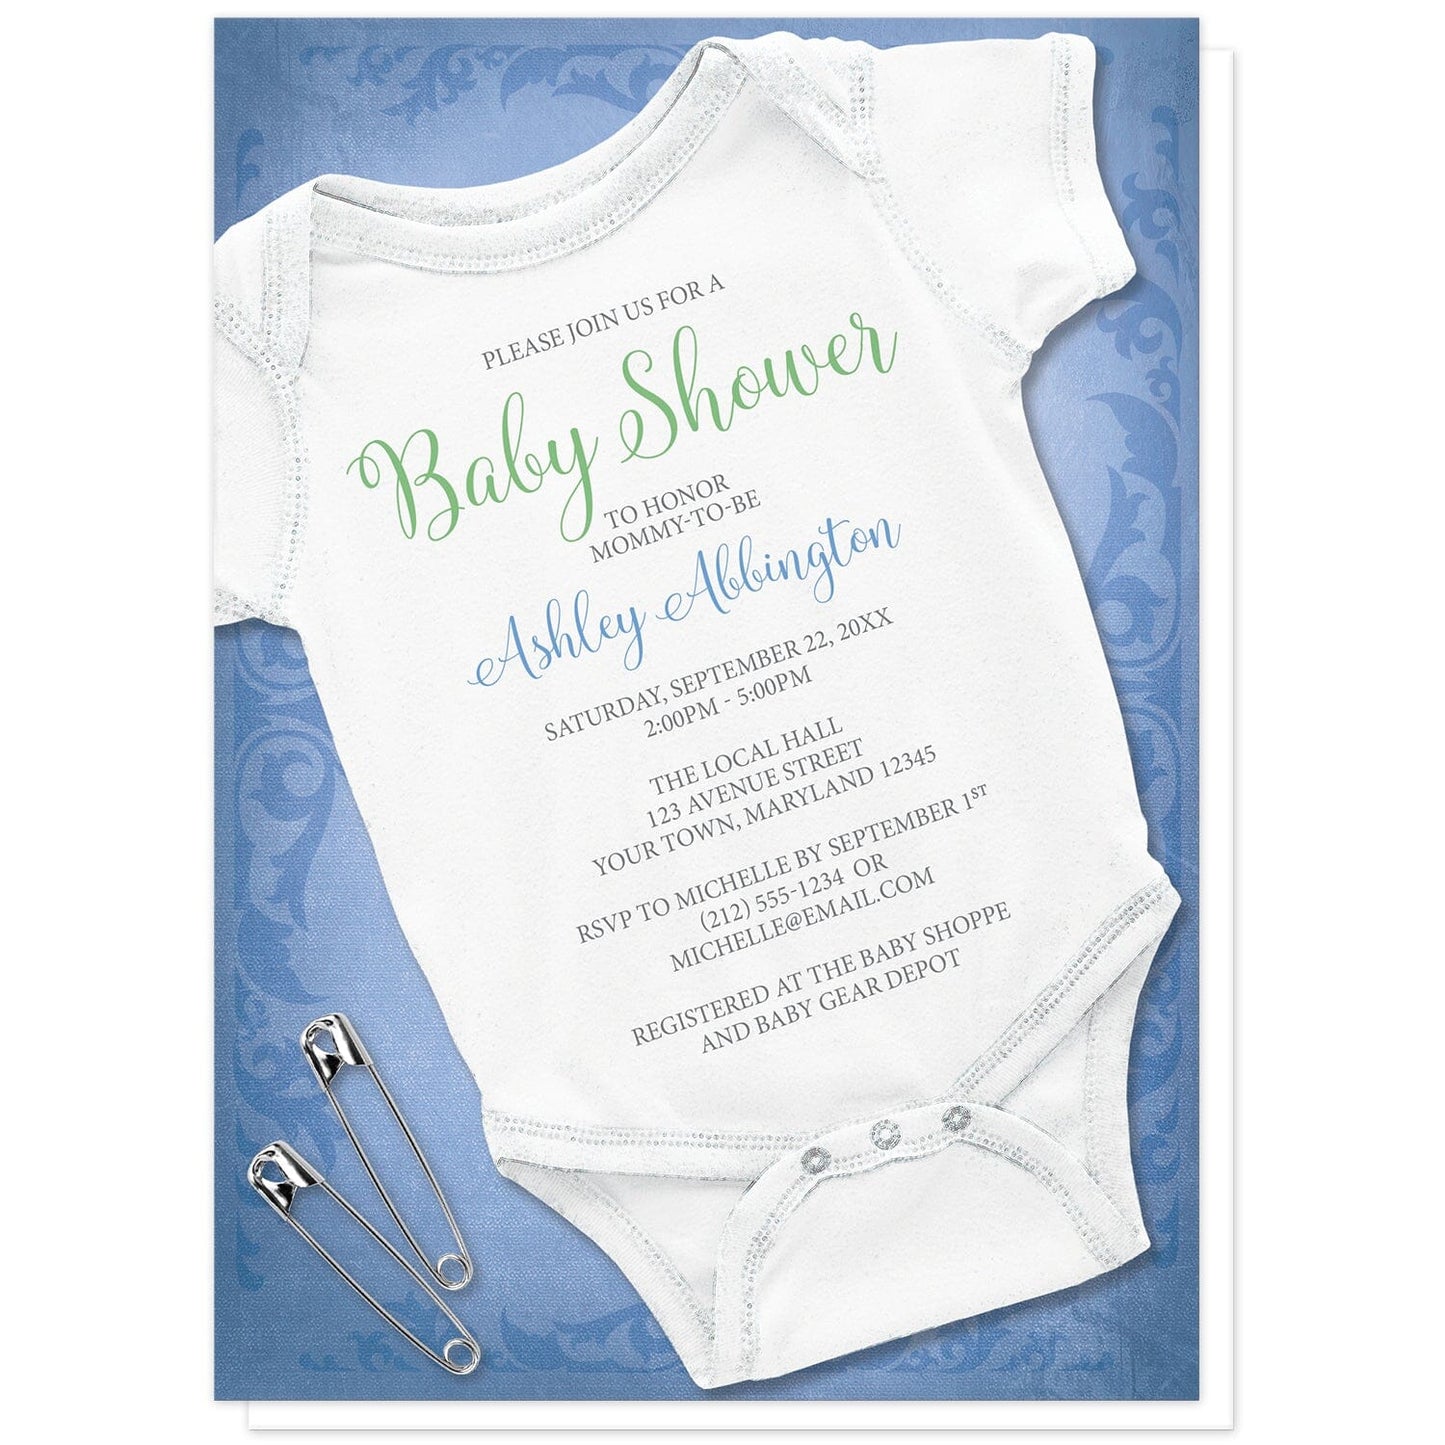 Baby Bodysuit and Safety Pins Blue Baby Shower Invitations at Artistically Invited. Baby bodysuit and safety pins blue baby shower invitations for the mommy-to-be designed with a white infant bodysuit and two safety pins to the side. These boy bodysuit baby shower invitations feature your personalized shower details custom printed in blue, green, and gray over the white infant bodysuit, over a uniquely detailed blue background design.